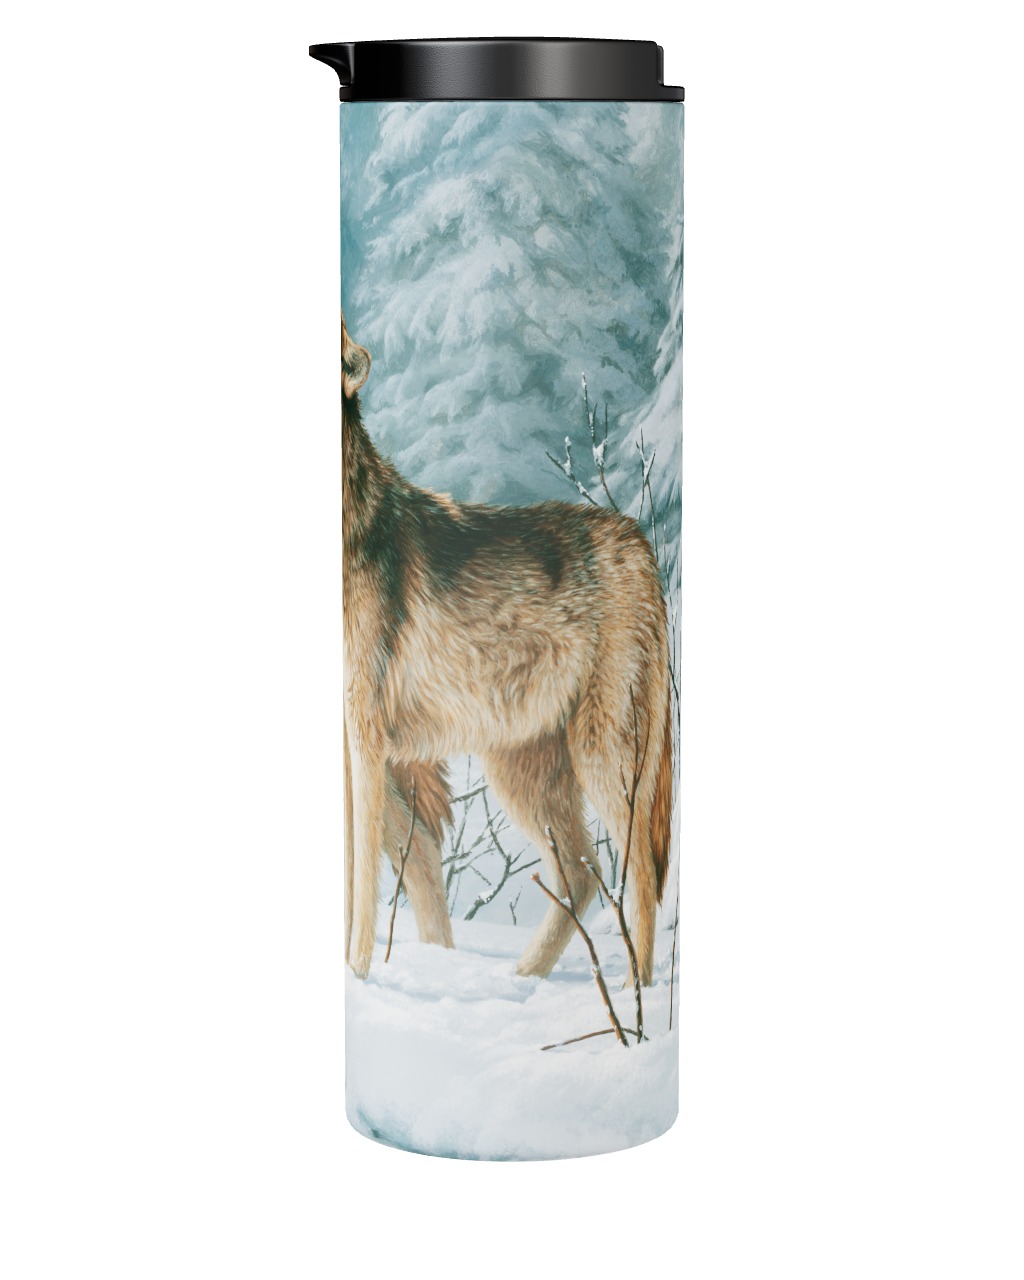 Call Of The Wild - Wolves Tumbler